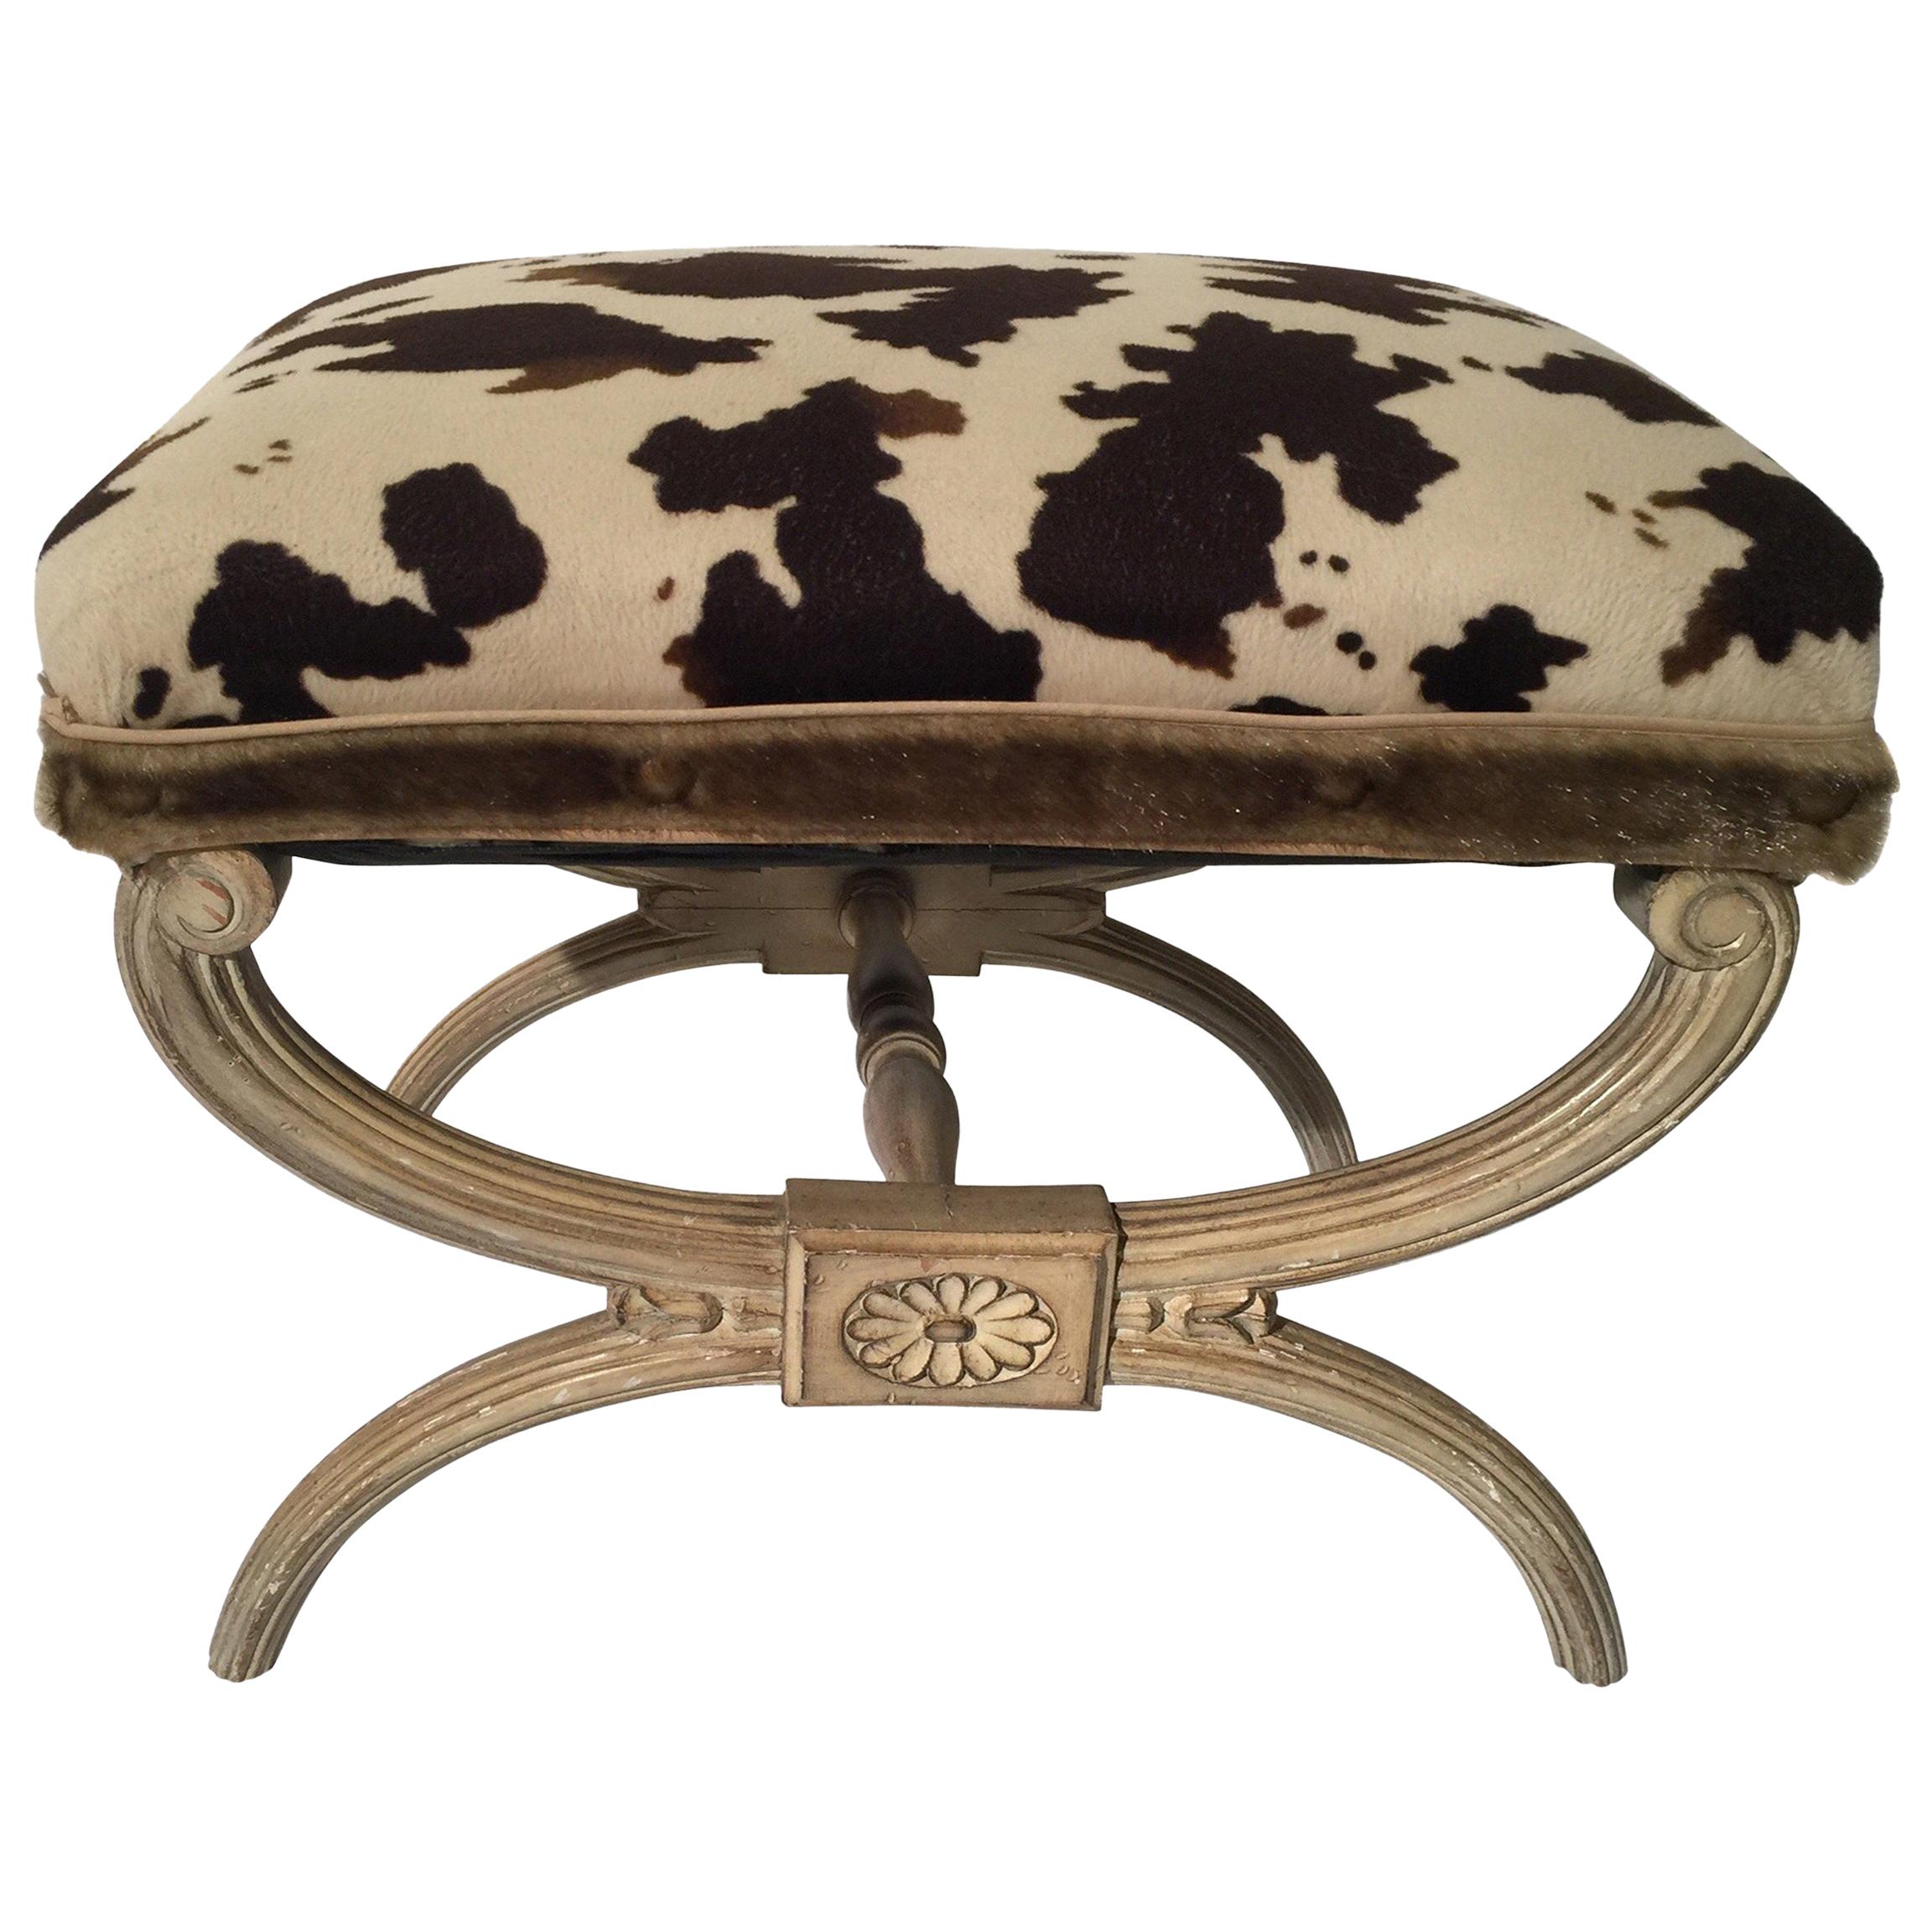 Midcentury Neoclassical X-Bench with Faux Cowhide Animal Print Upholstery